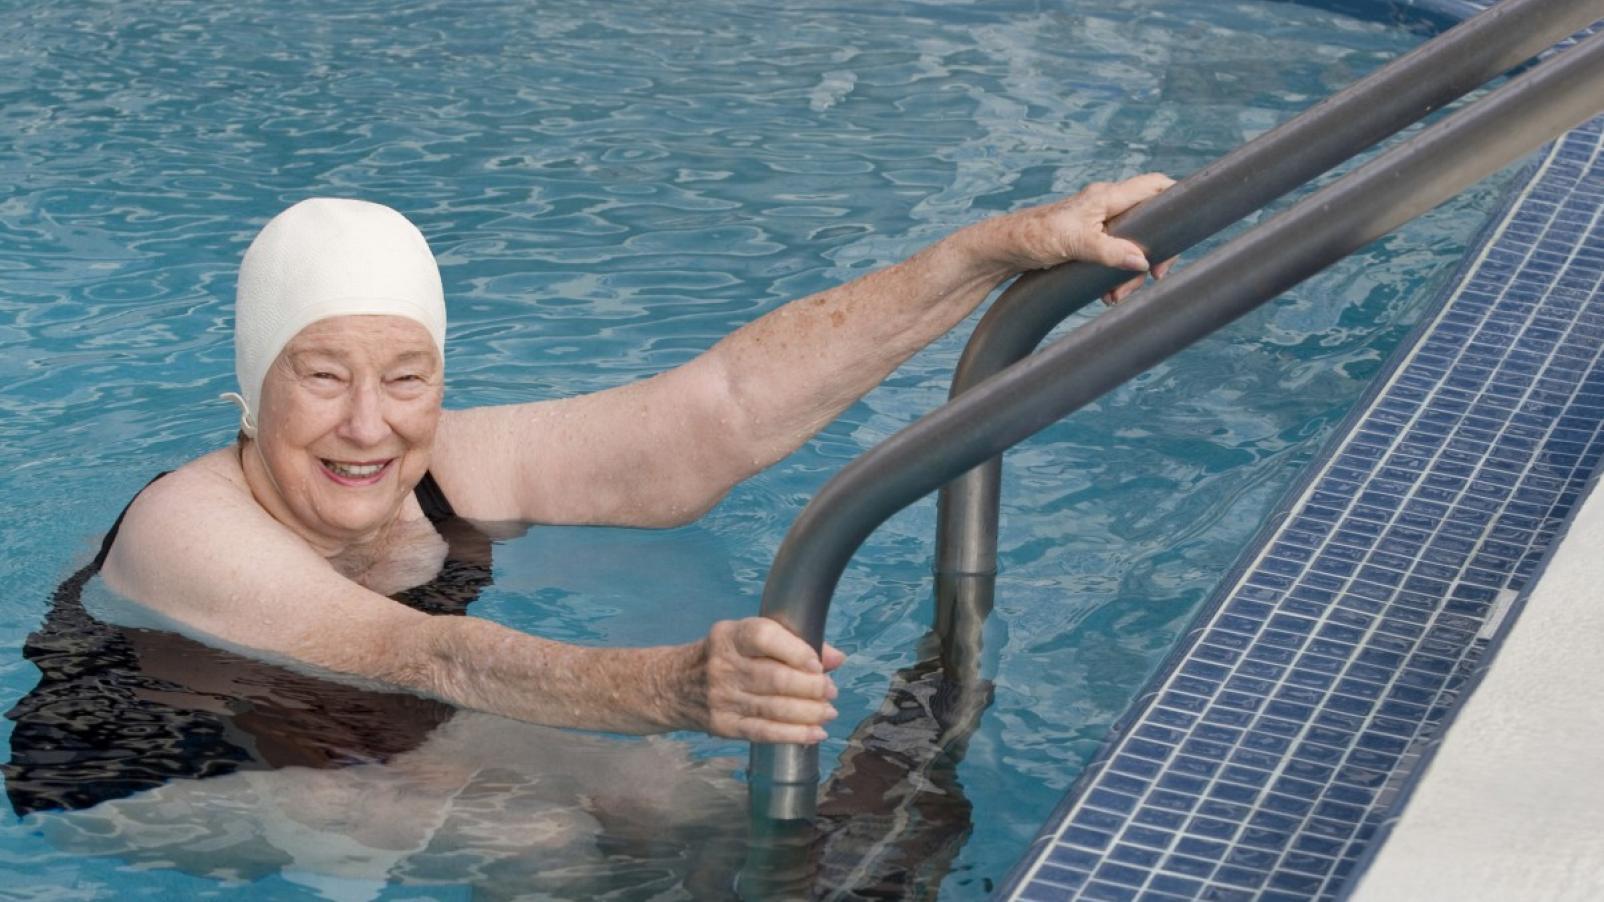 A women in swimwear including a swimmers cap climbing out of a swimming pool and smiling at the camera